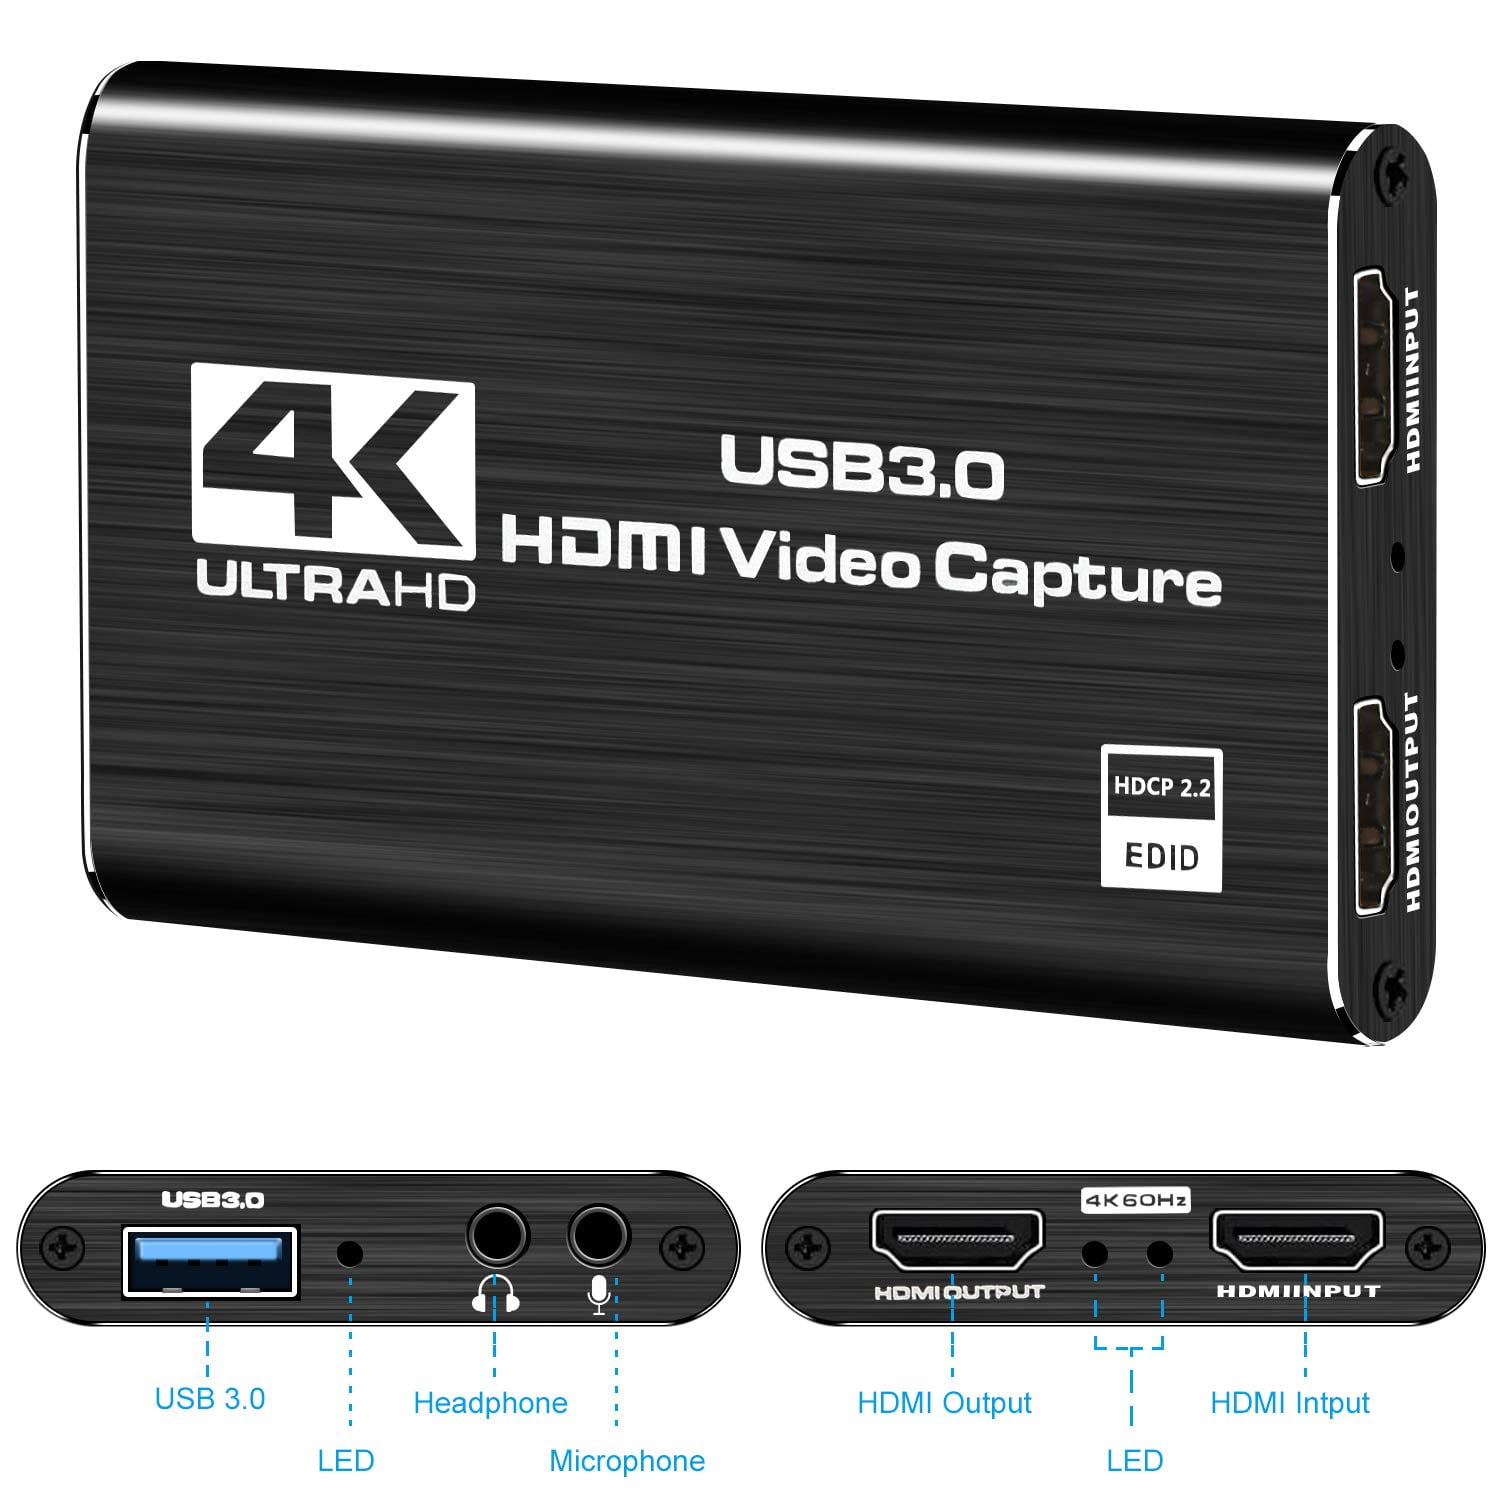 4K HDMI to USB3.0 Video Capture Card Setup Tutorial with obs